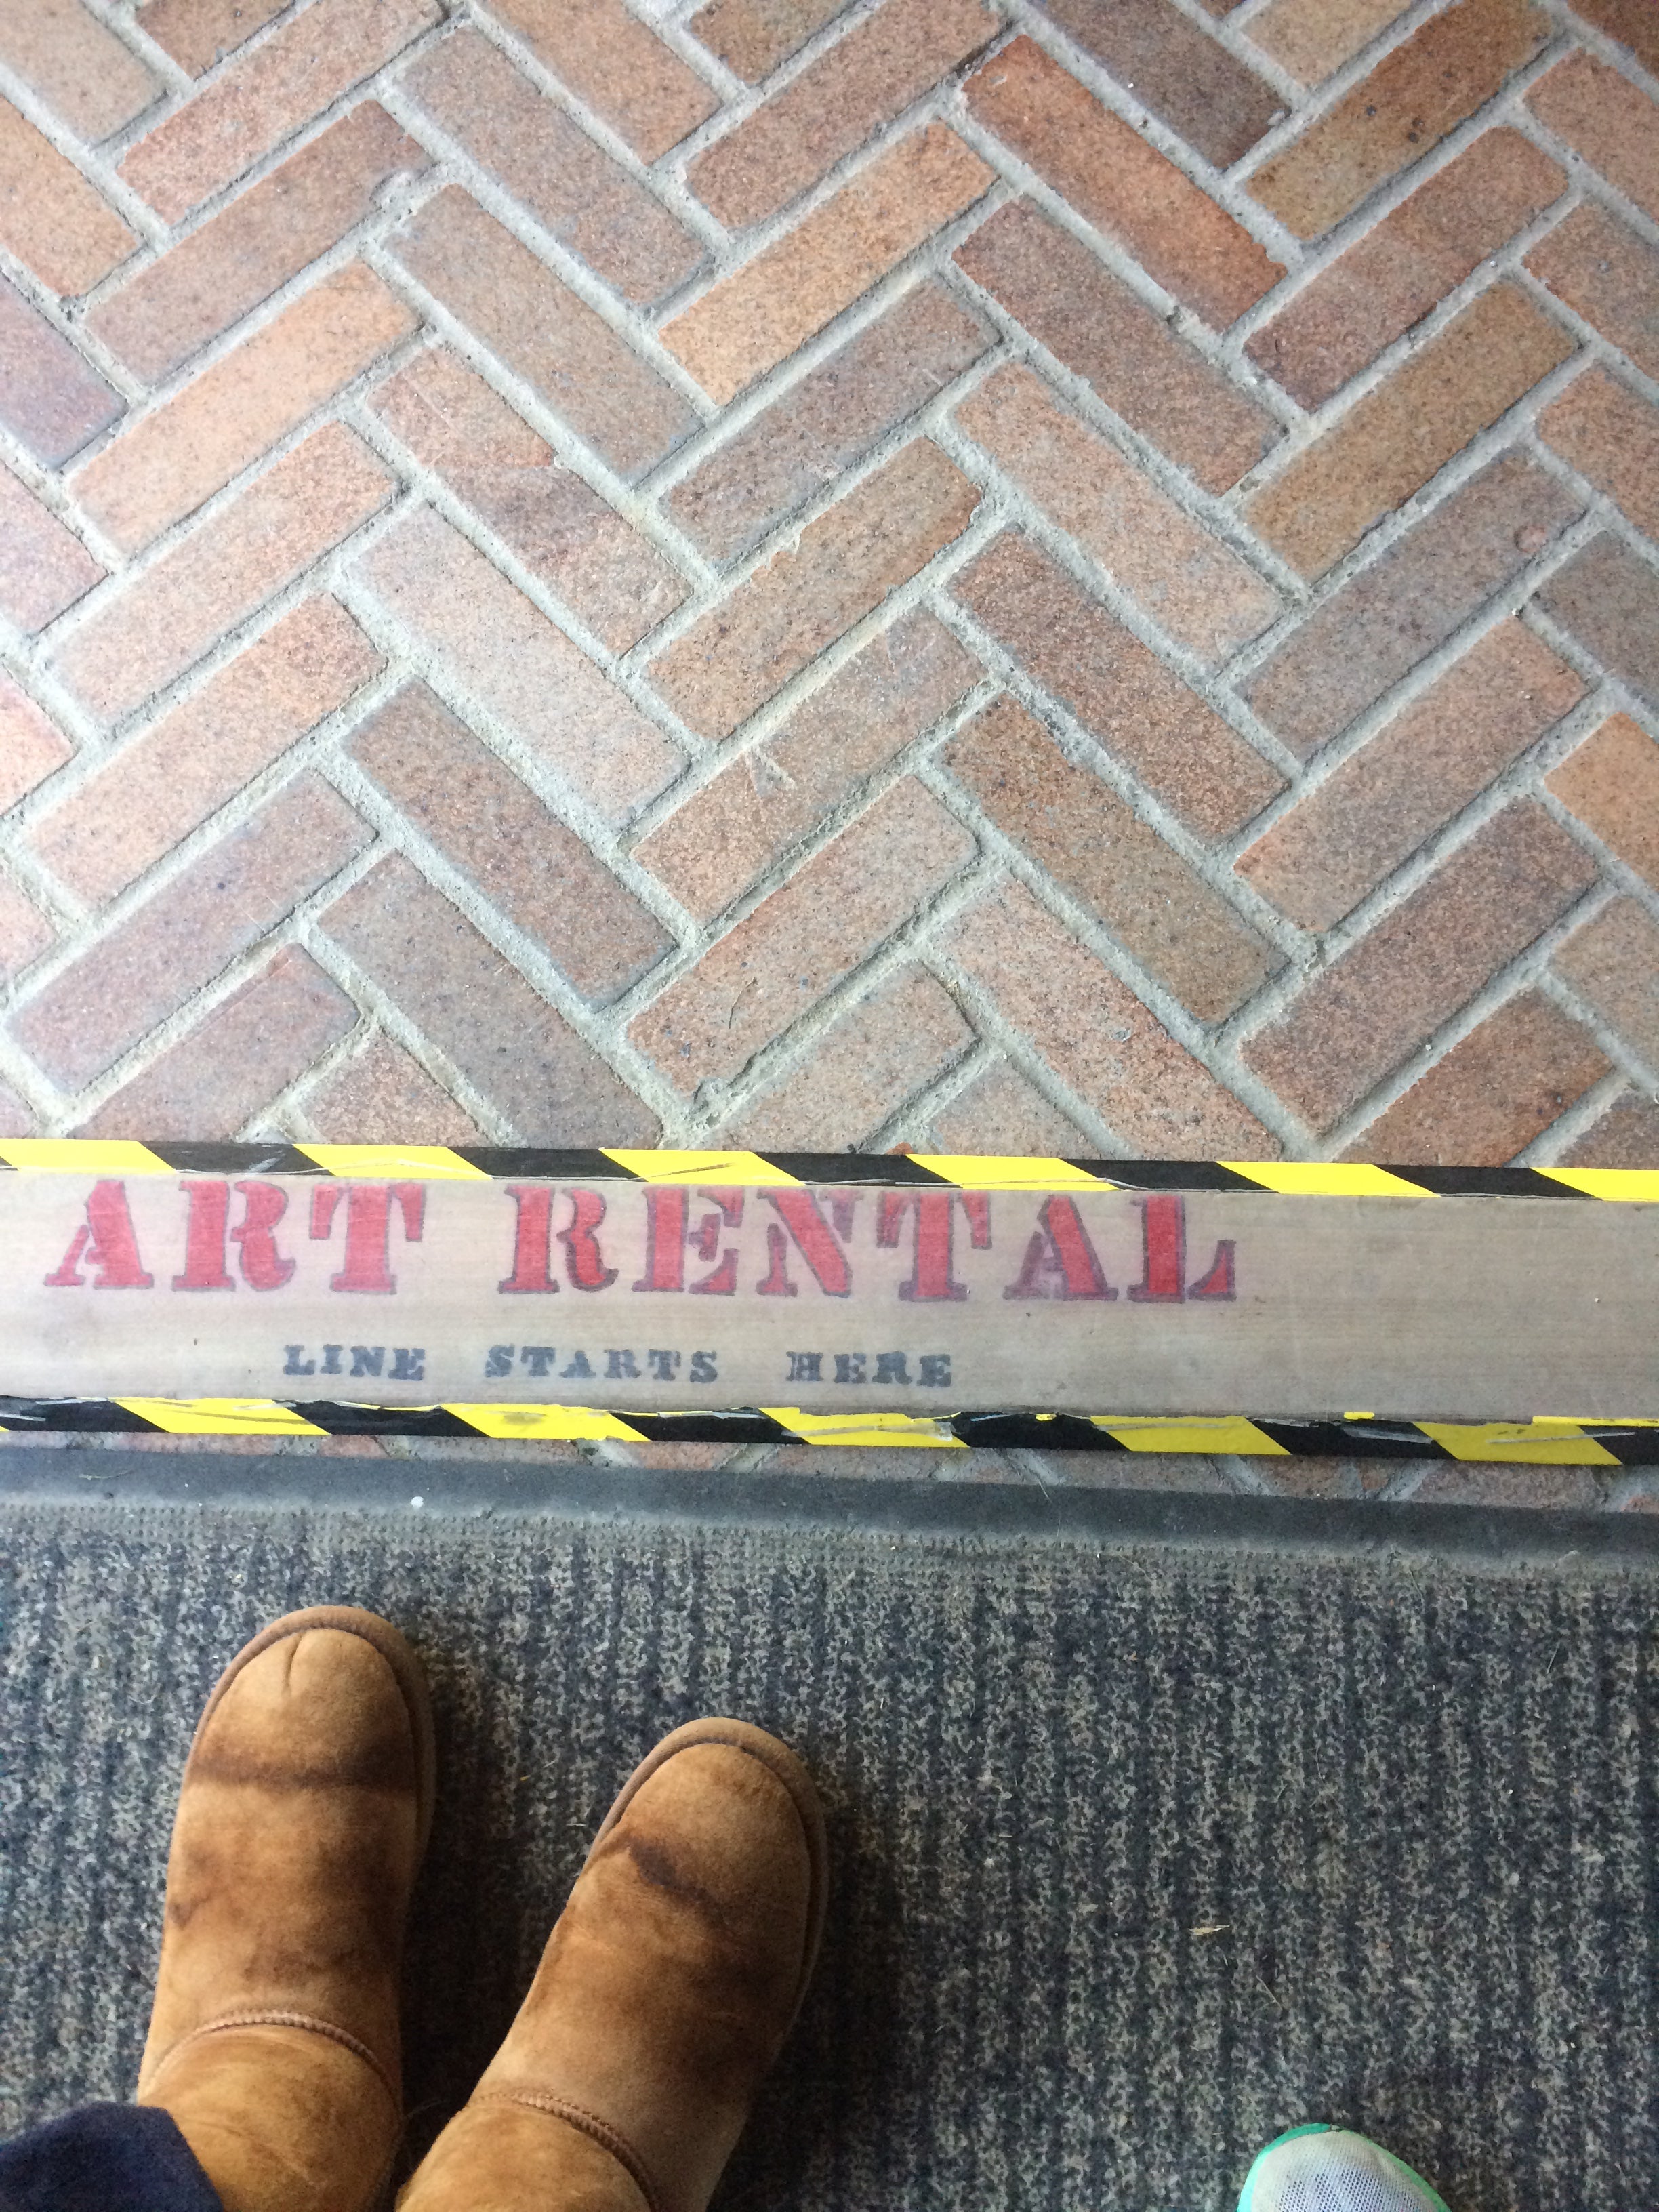 A pair of boots stand on a brick floor with a sign in front of them that says "ART RENTAL"